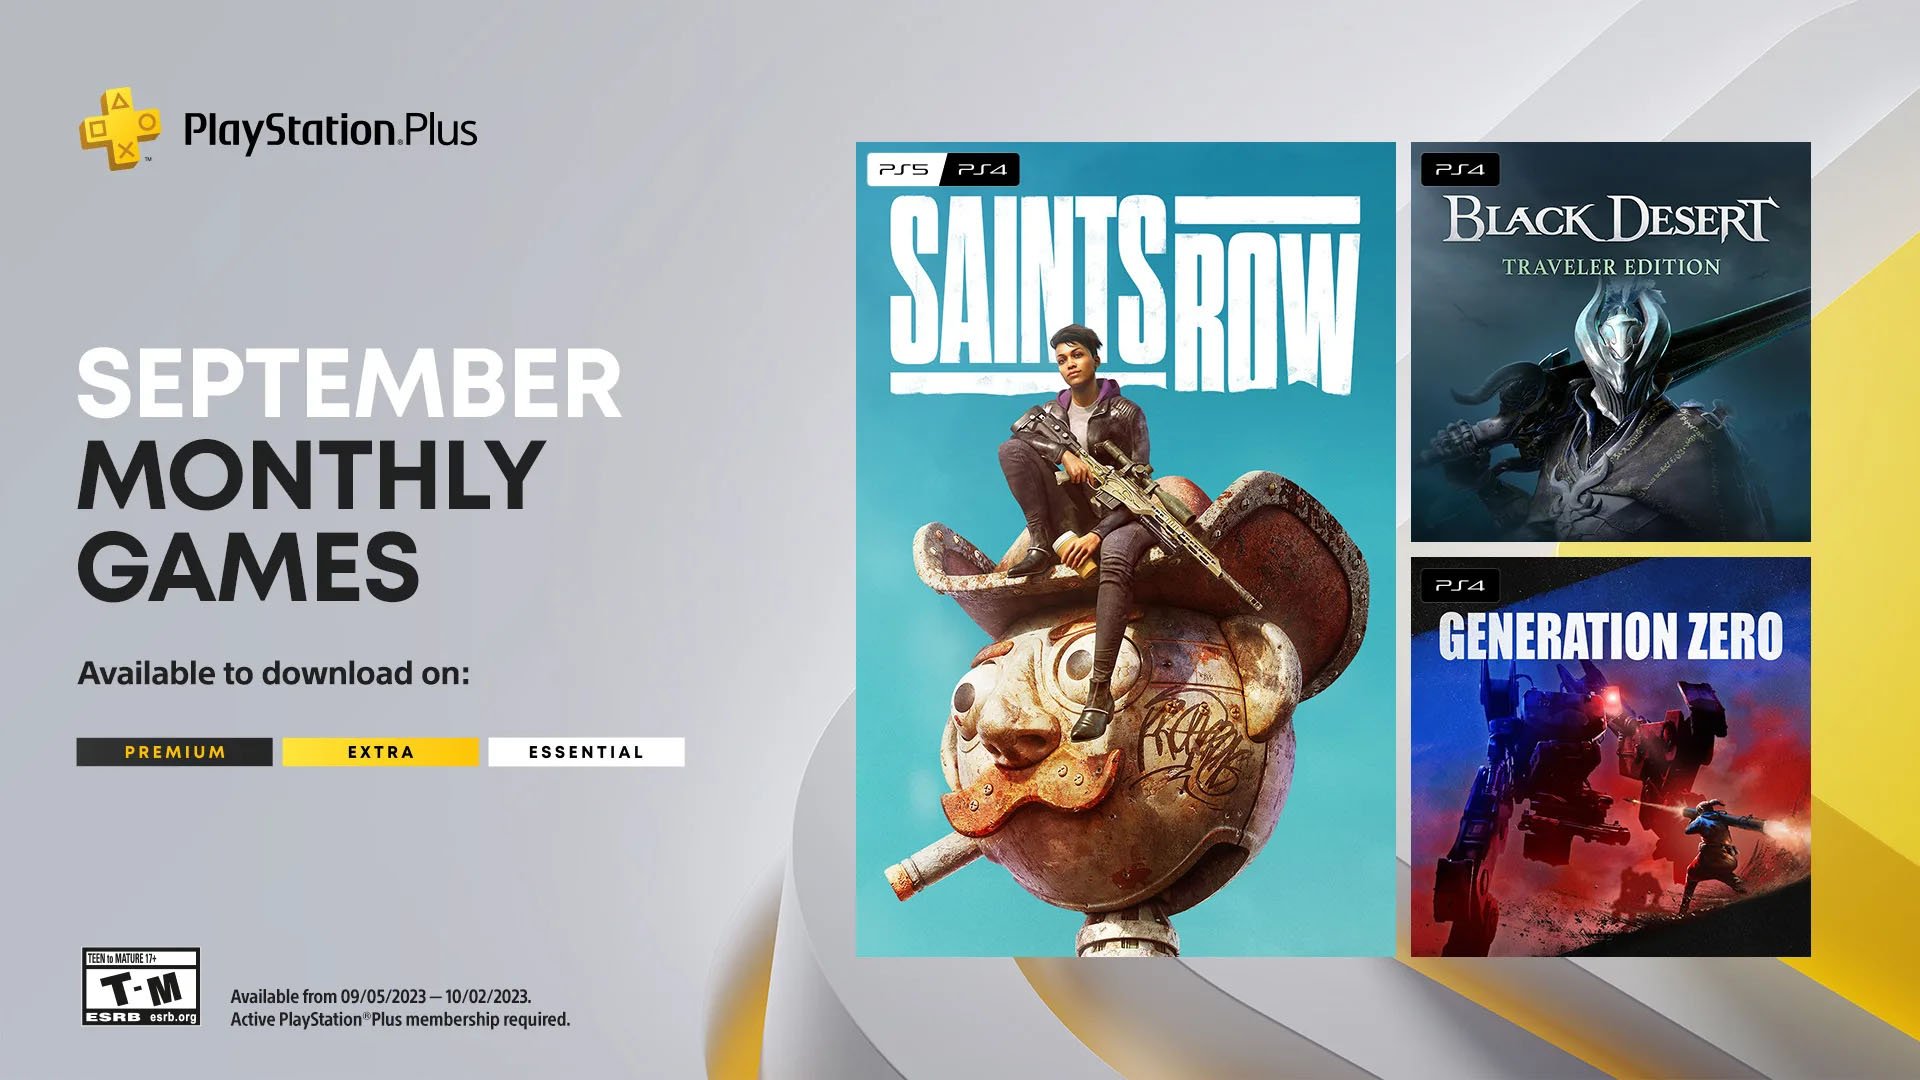 PS Plus' September monthly games are pretty disappointing